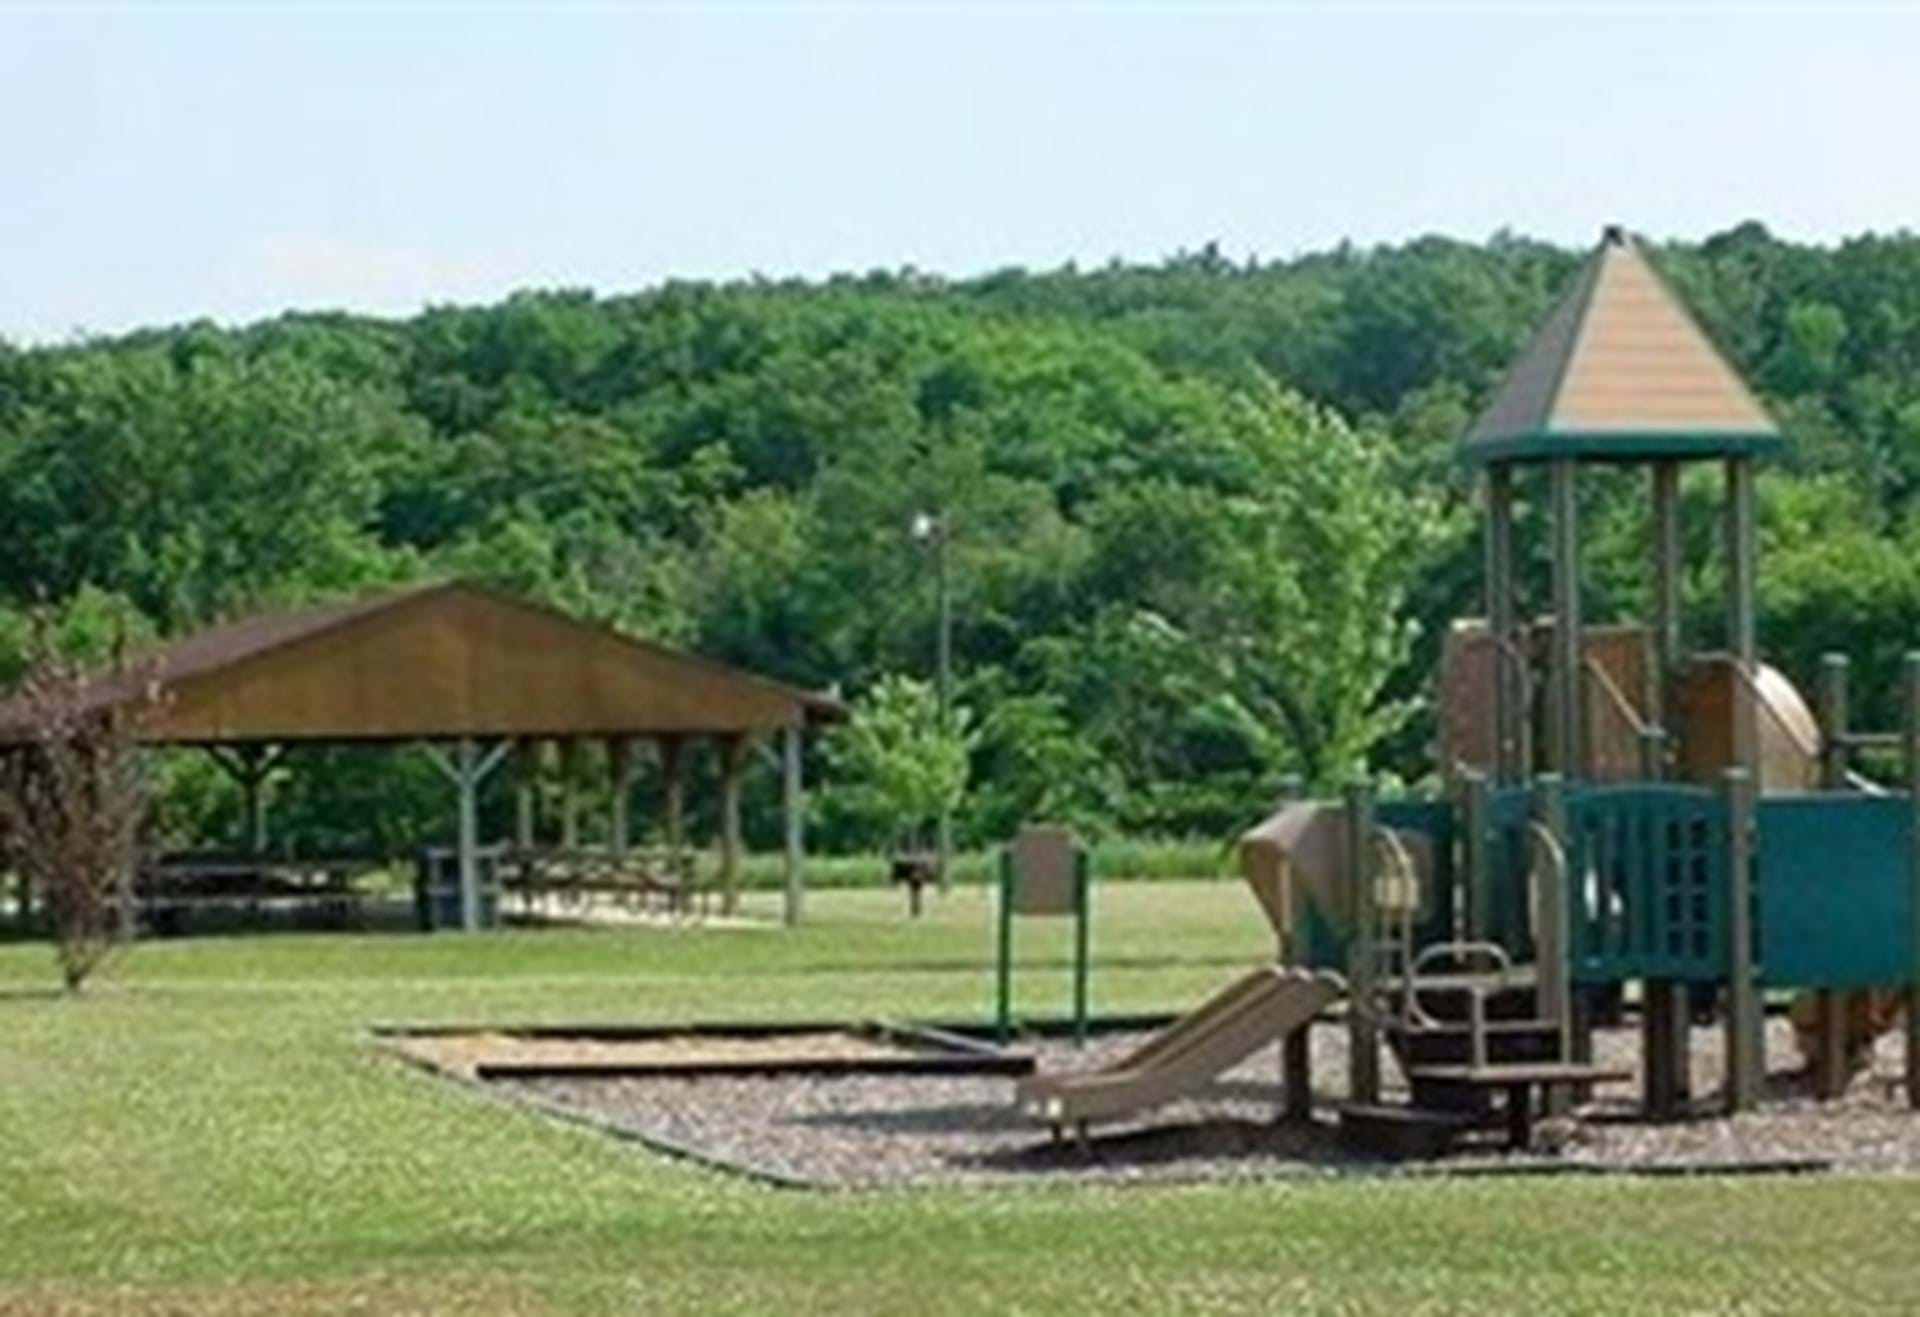 Playground & Shelter at Nature Center near campground